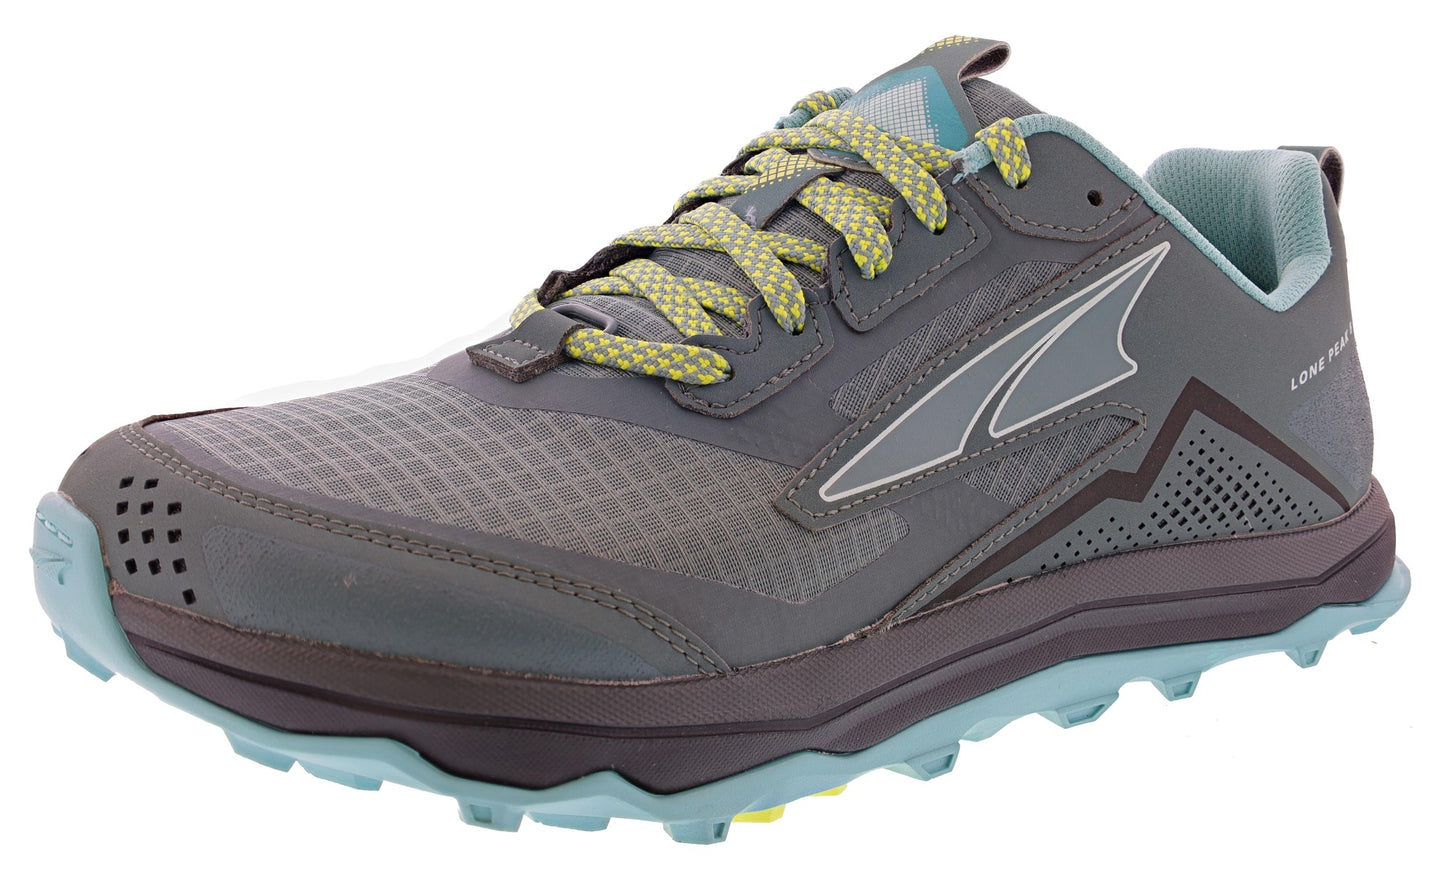 Lateral view of Basalm Green Altra Lone Peak 5 All Weather Lightweight Trail Running Shoes Women's